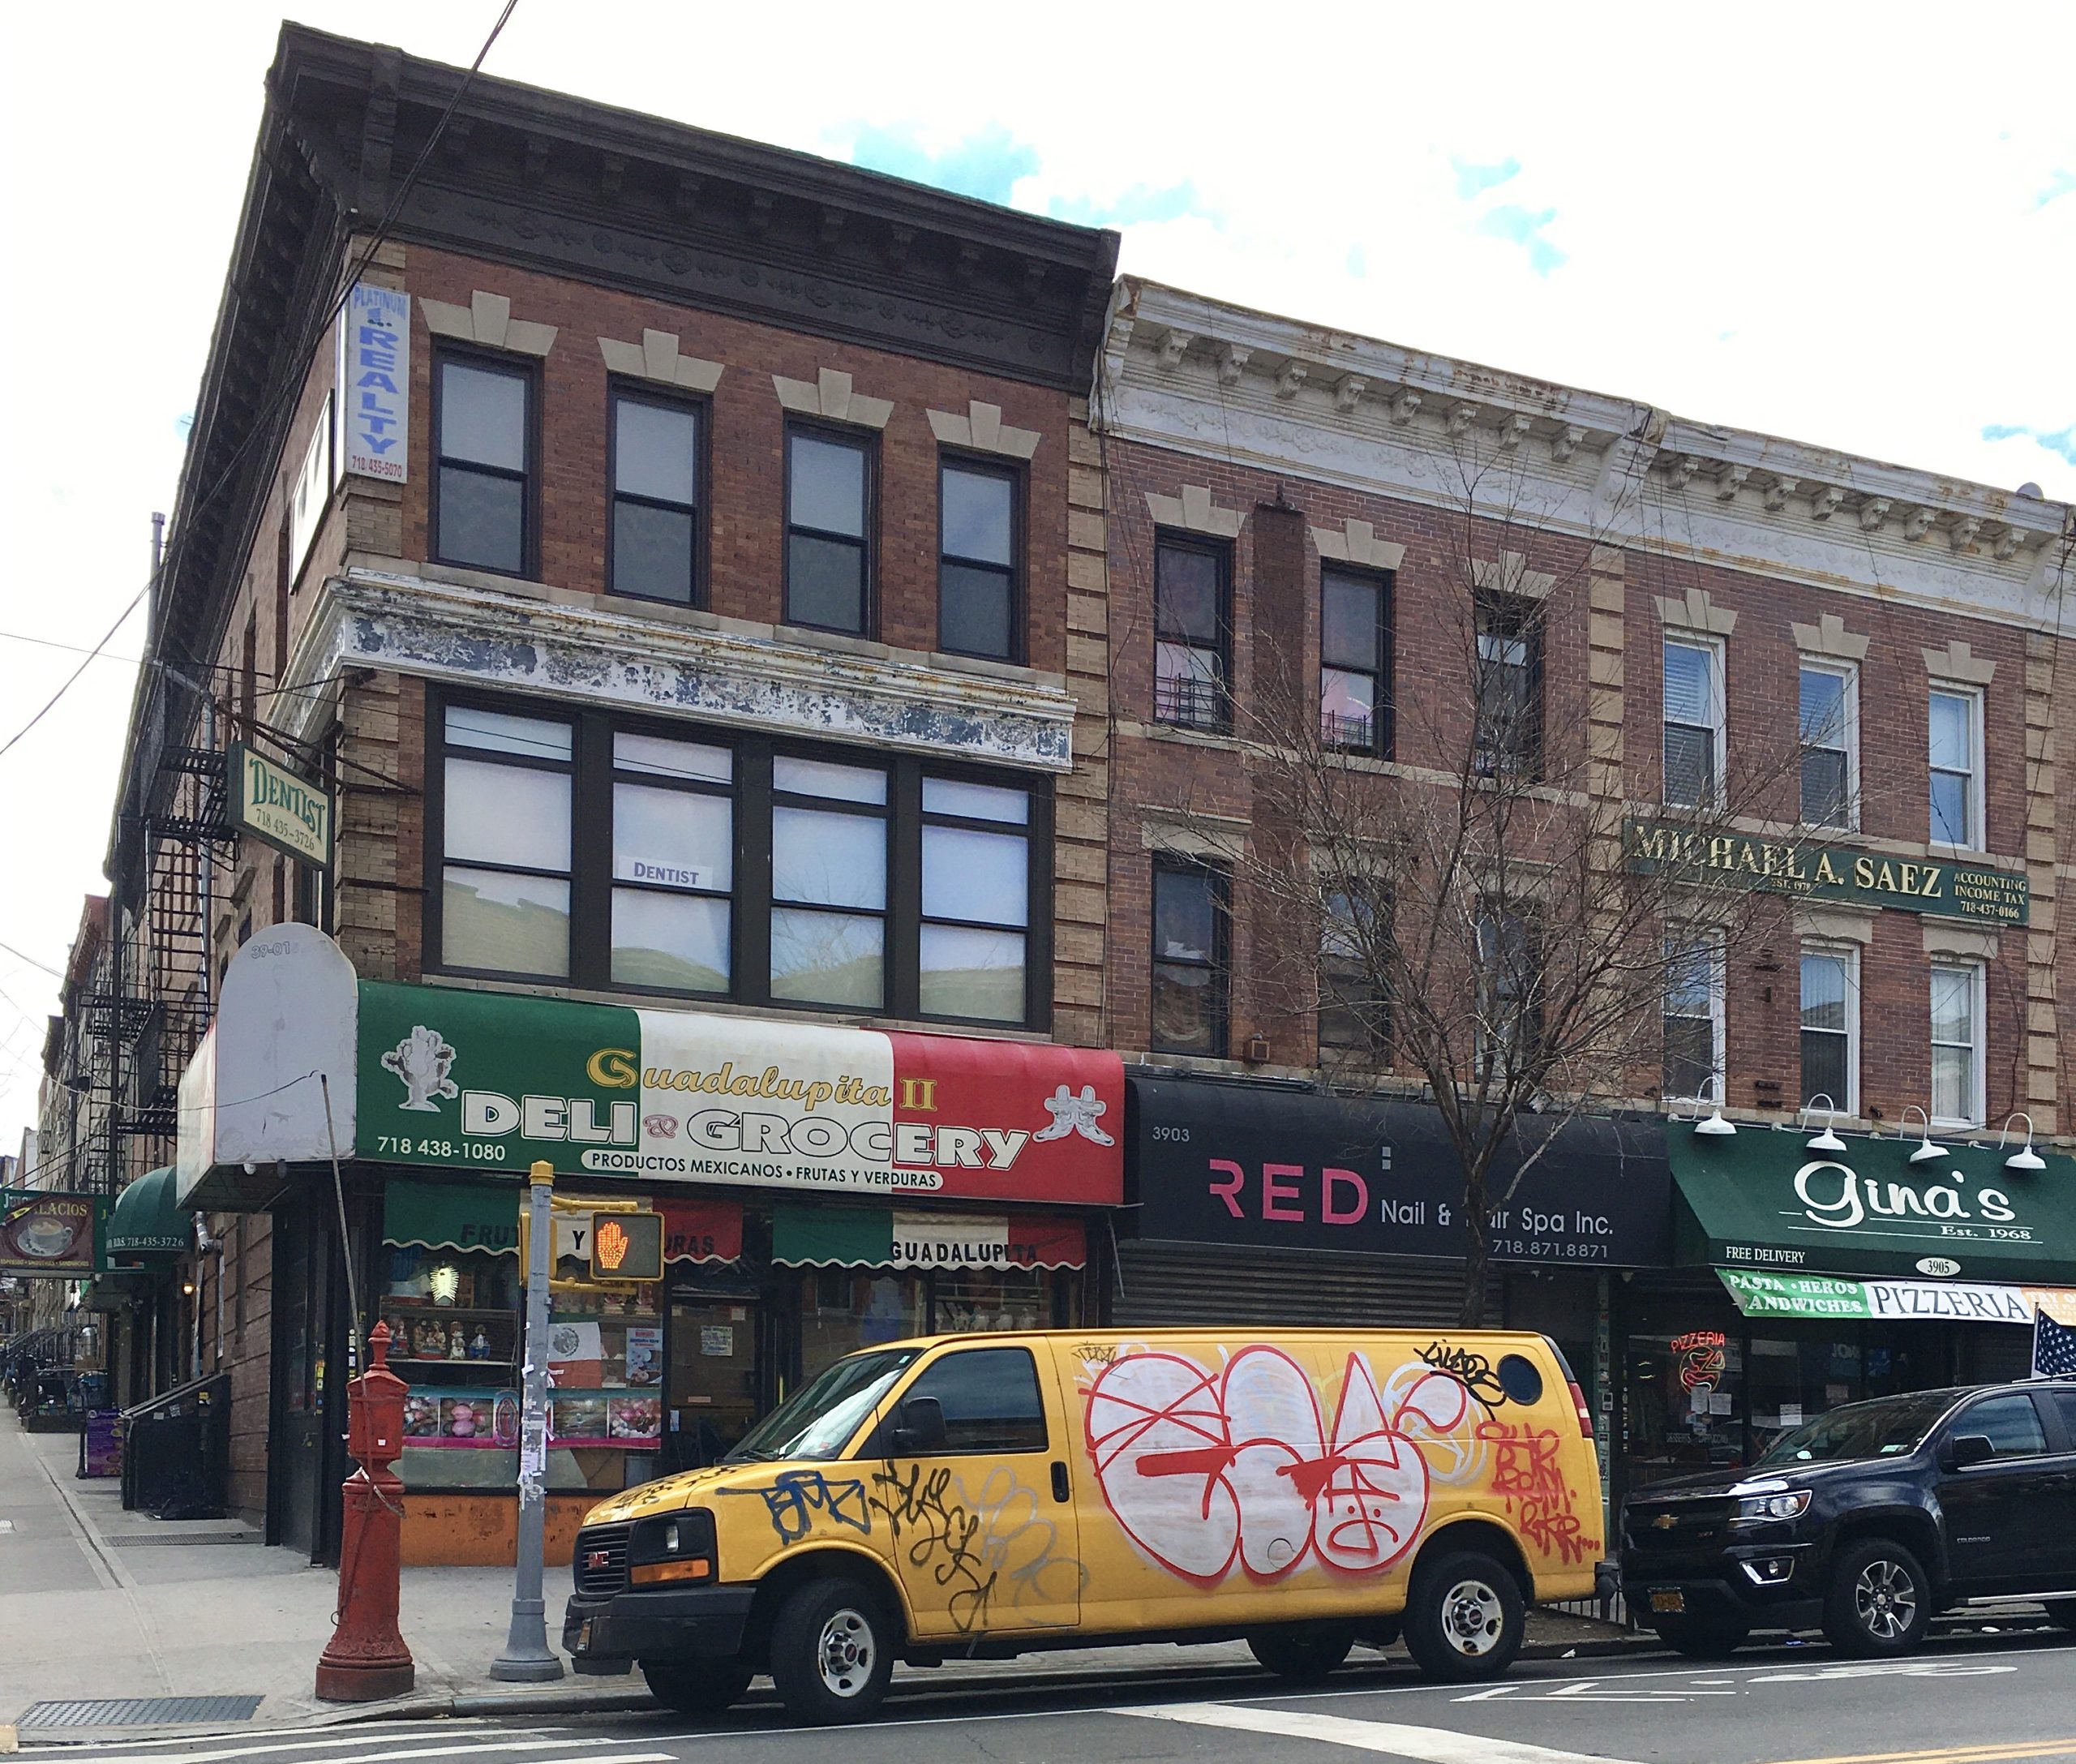 Guadalupita II, which sells Mexican foods, is located on this Fifth Avenue corner in Sunset Park. Photo: Lore Croghan/Brooklyn Eagle